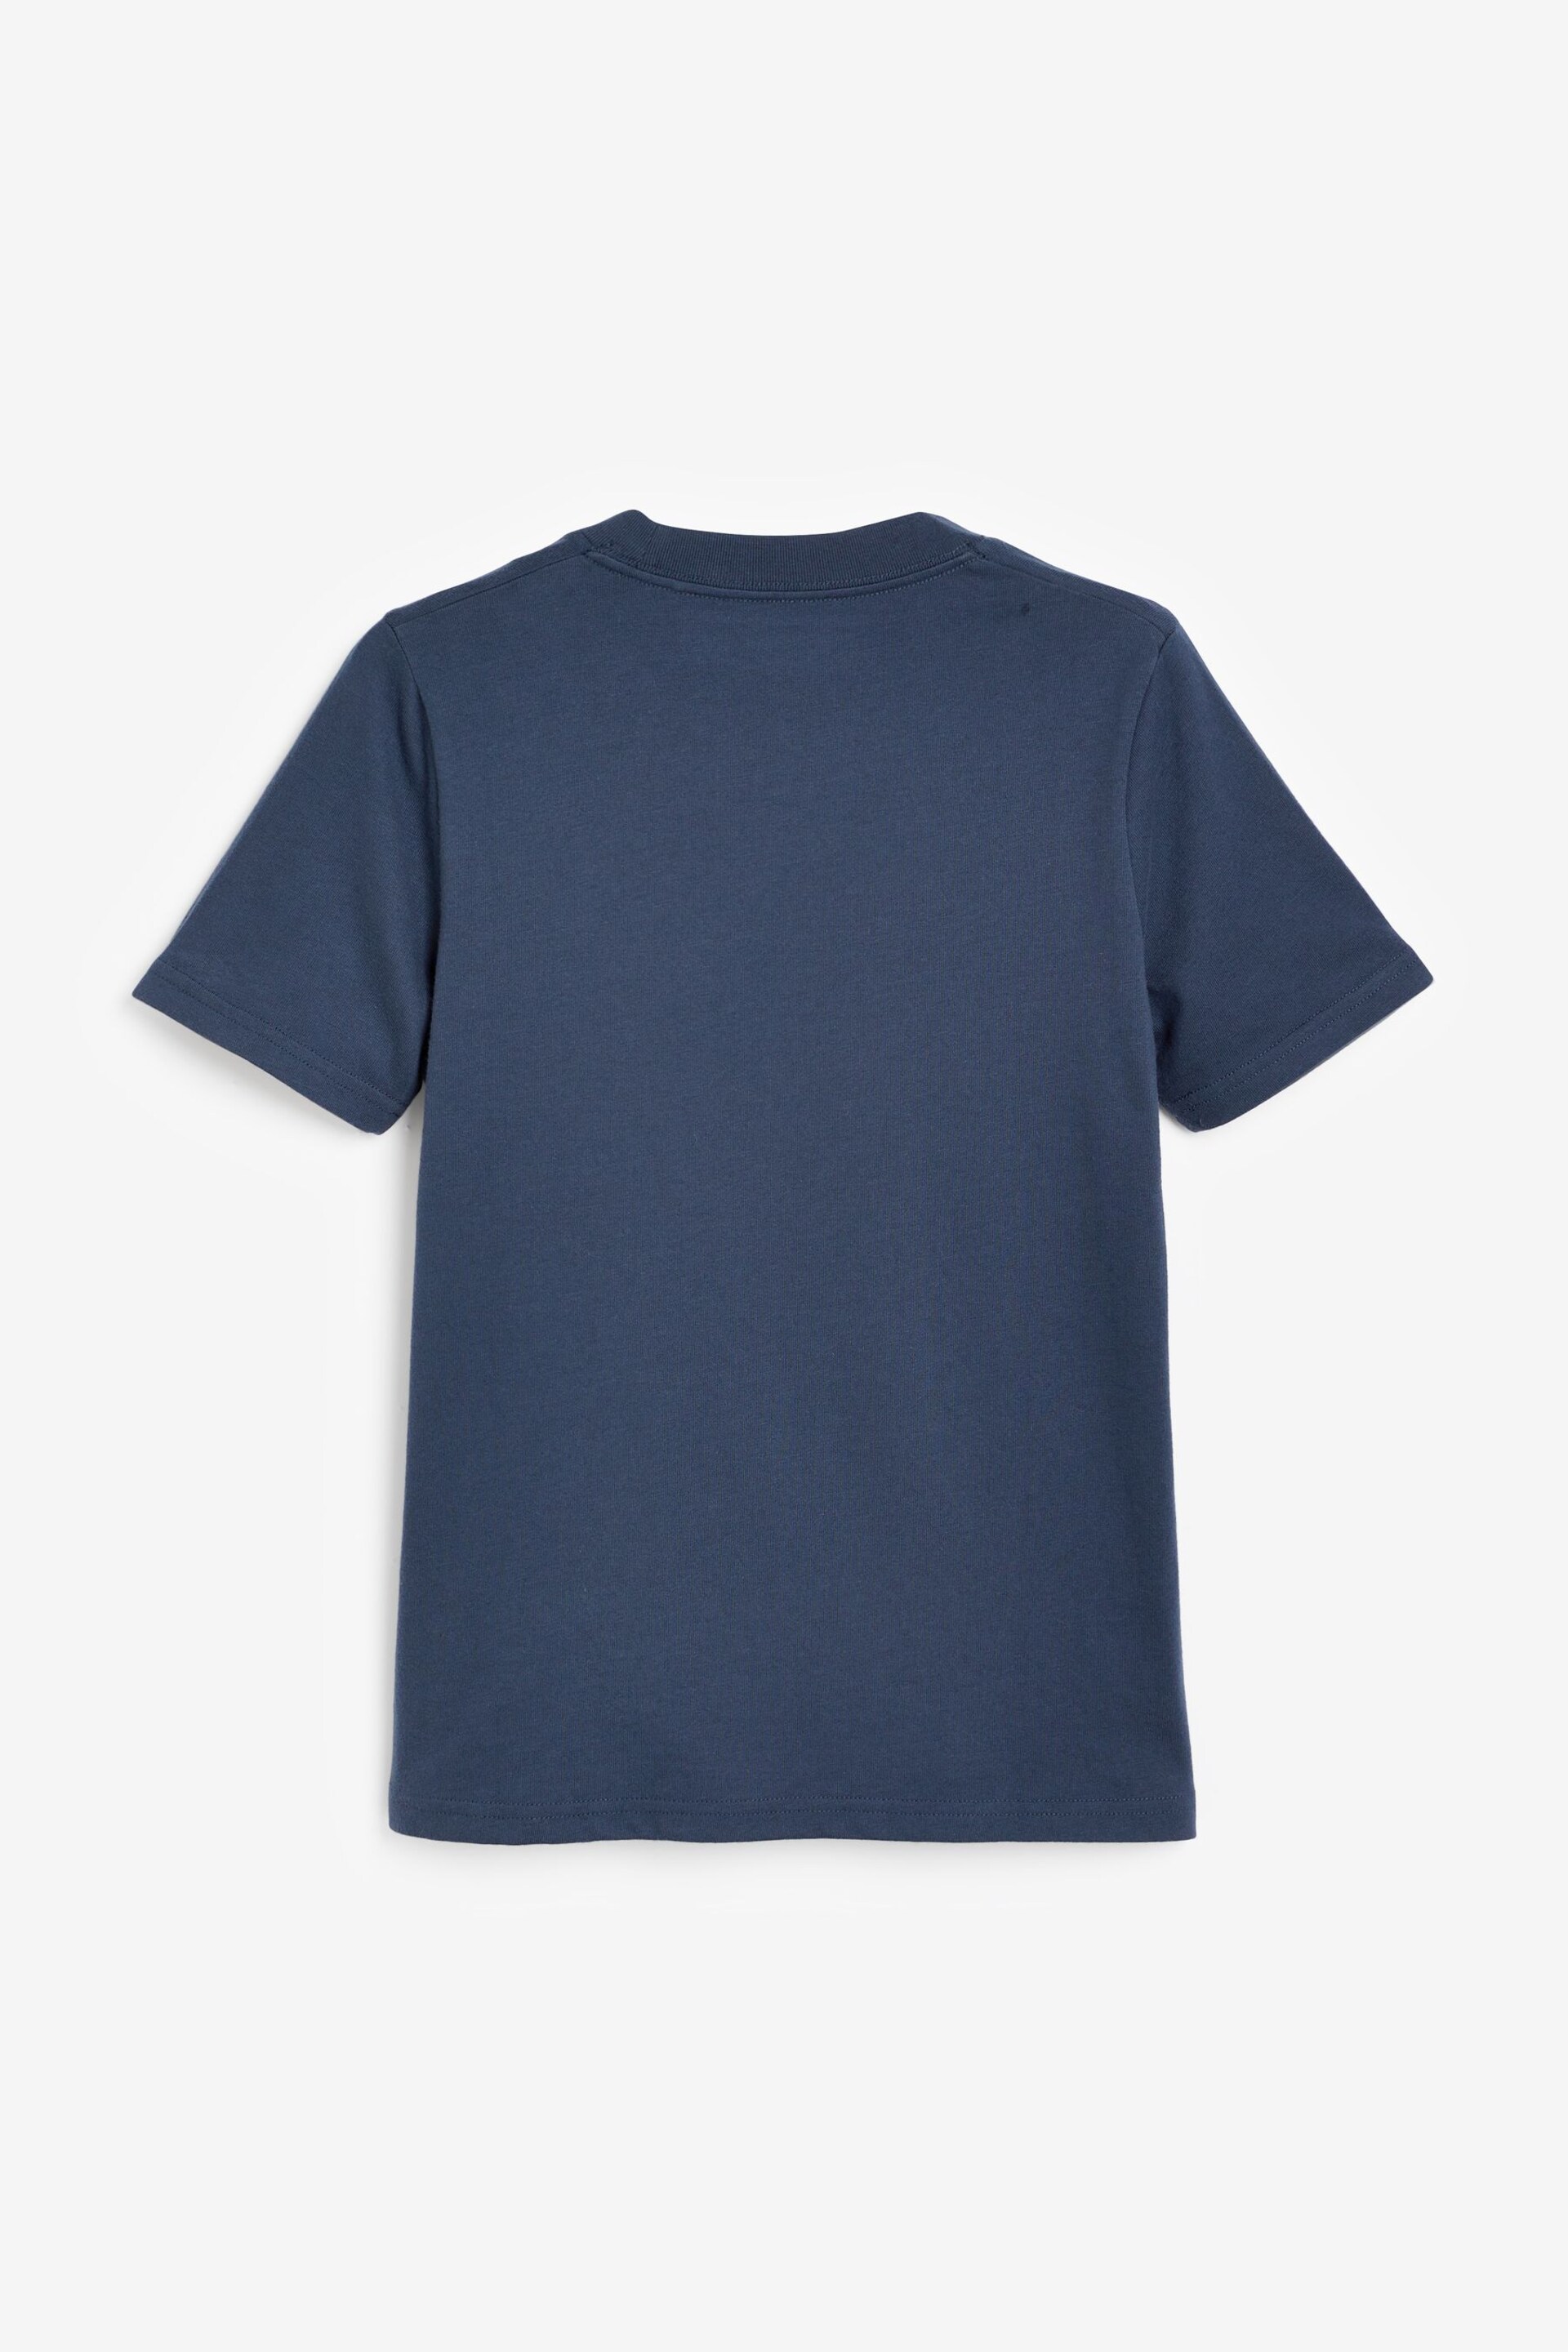 Abercrombie & Fitch Plain Small Logo T-Shirt - Image 2 of 3